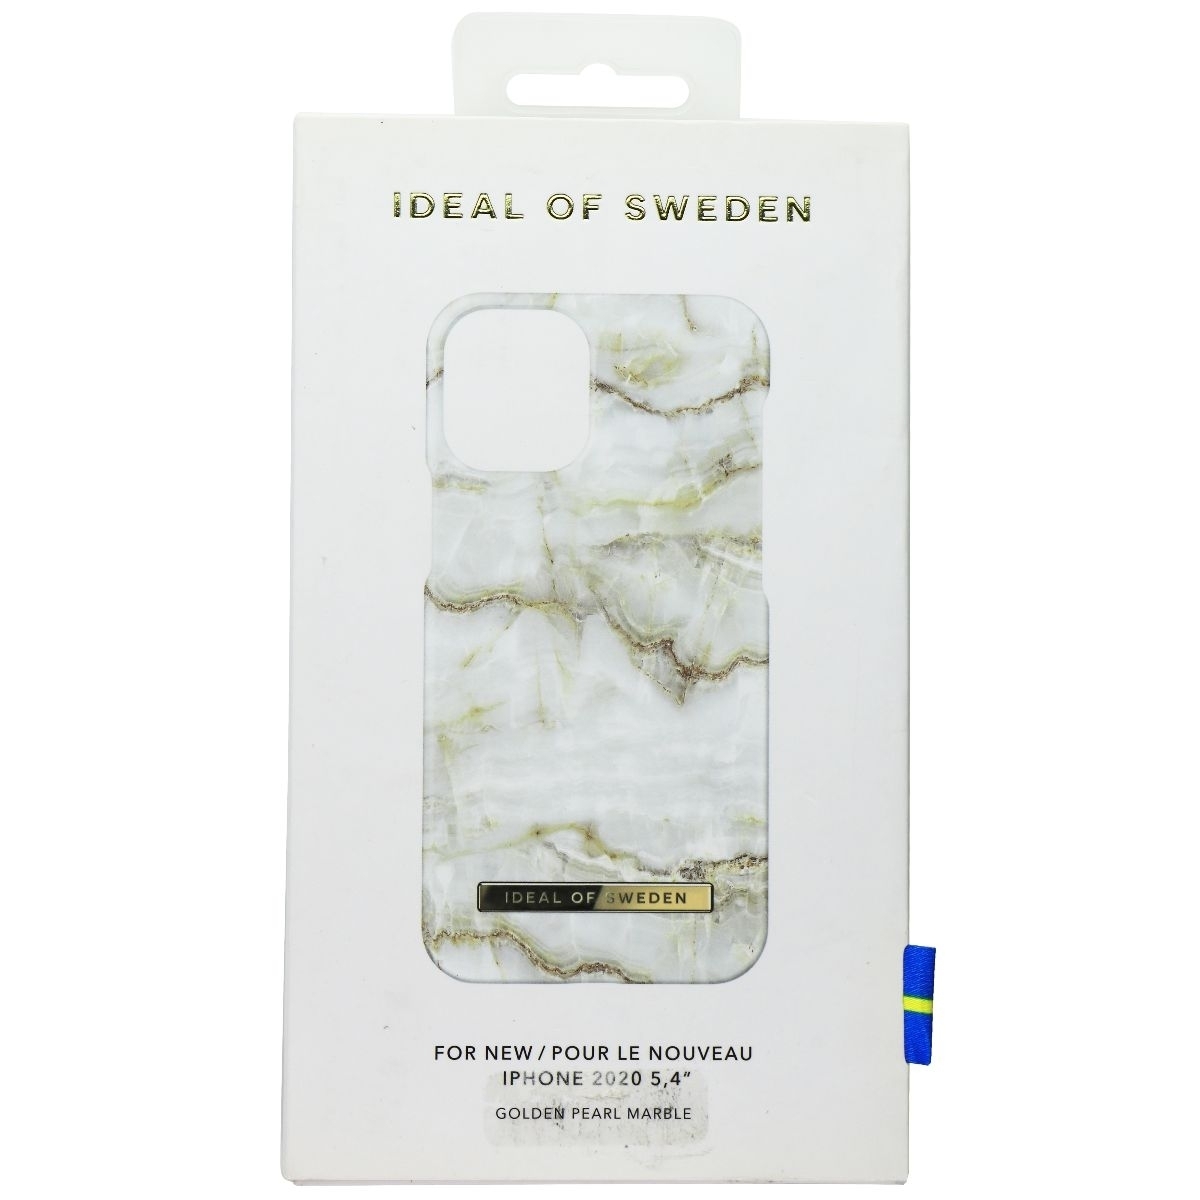 IDeal Of Sweden Hard Case For Apple IPhone 12 Mini - Golden Pearl Marble (Refurbished)